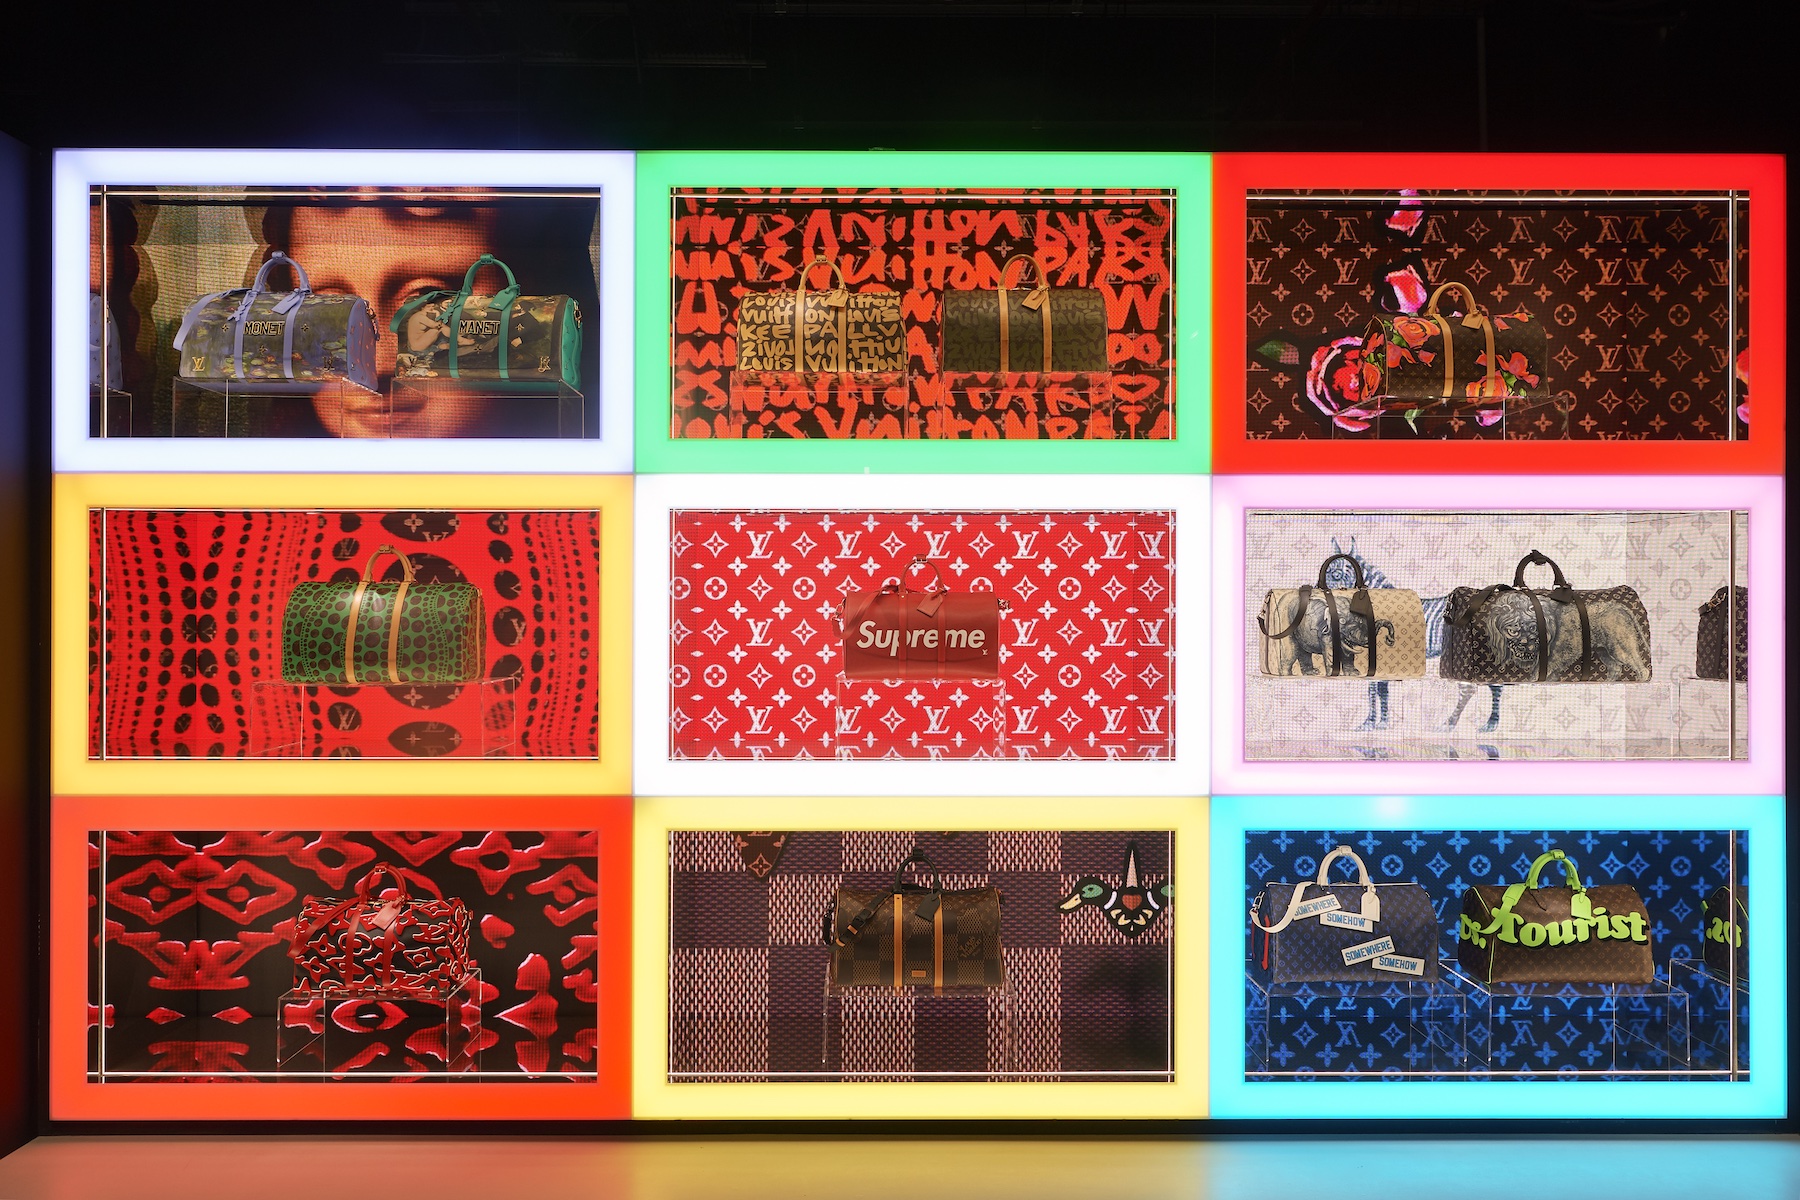 LV Dream by Louis Vuitton is up: free exhibition hall, store, café